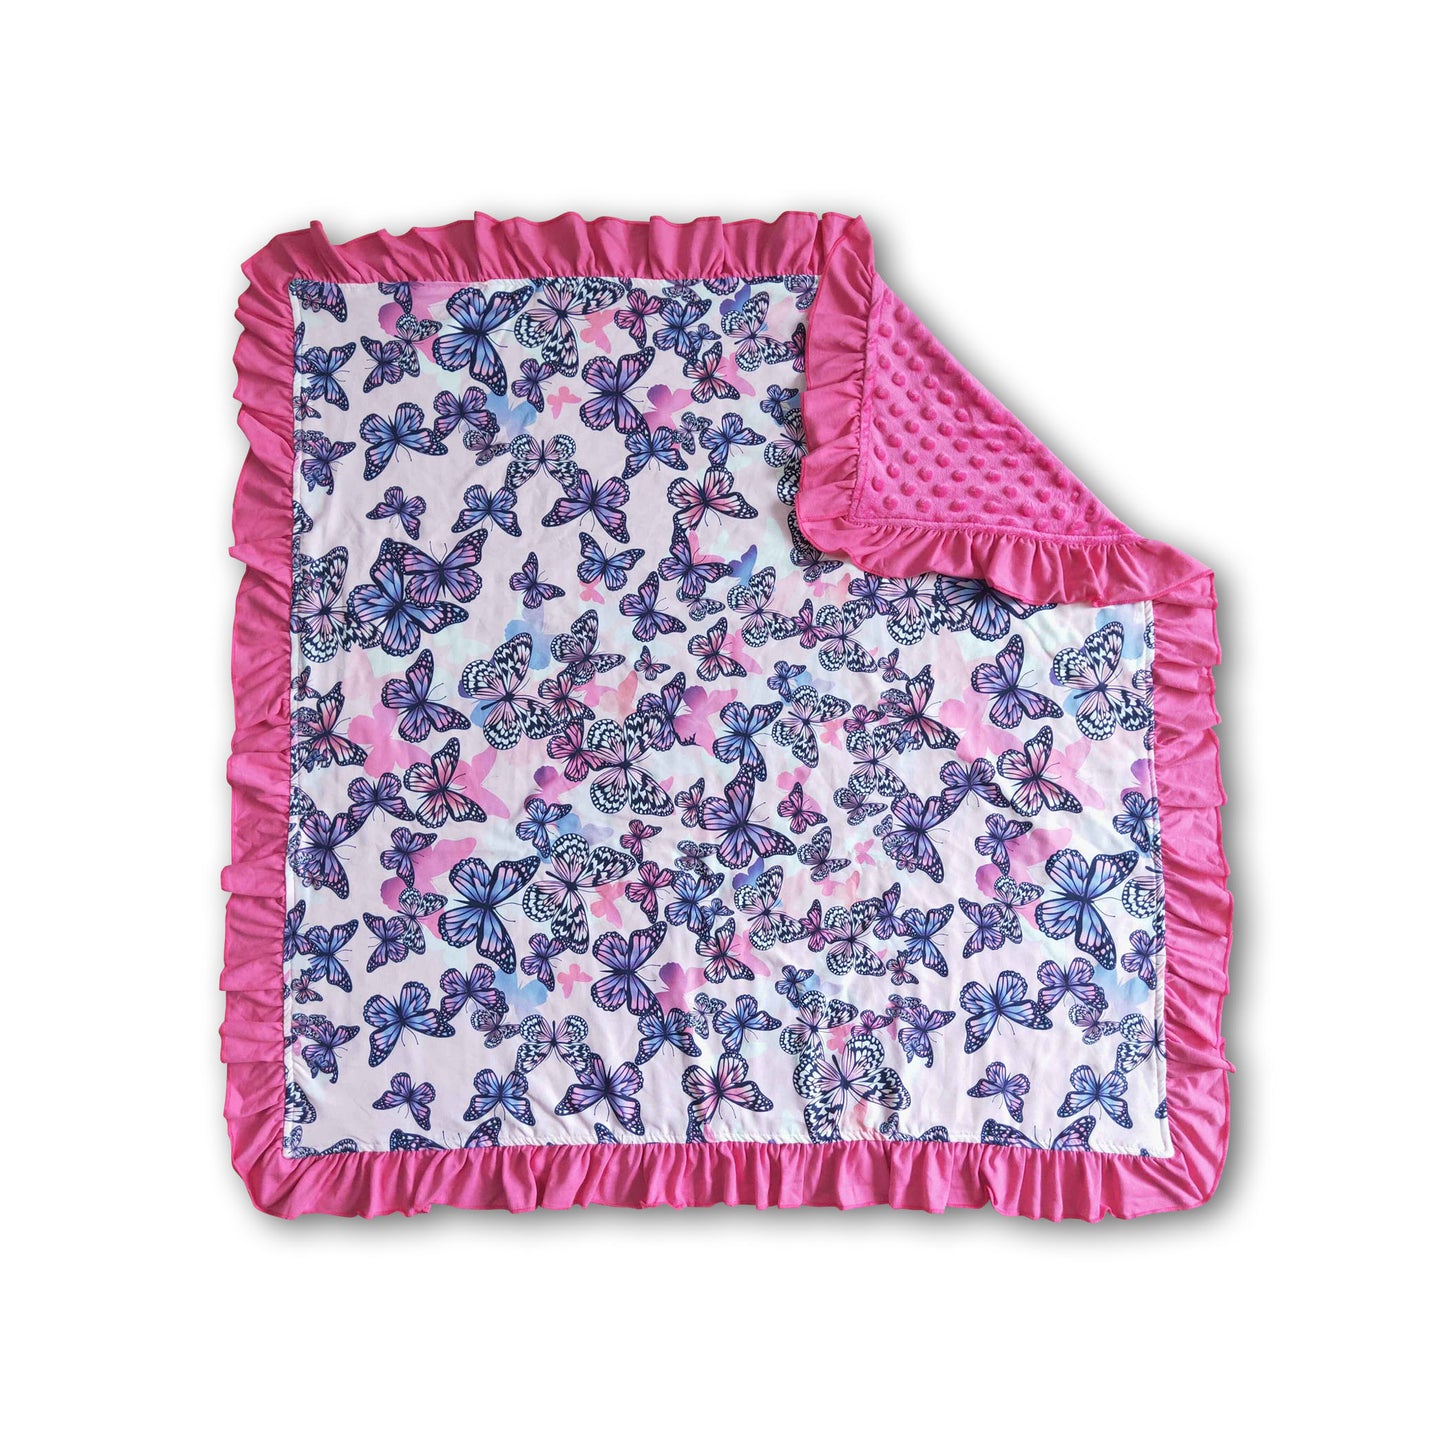 Butterfly hot pink ruffle baby blankets